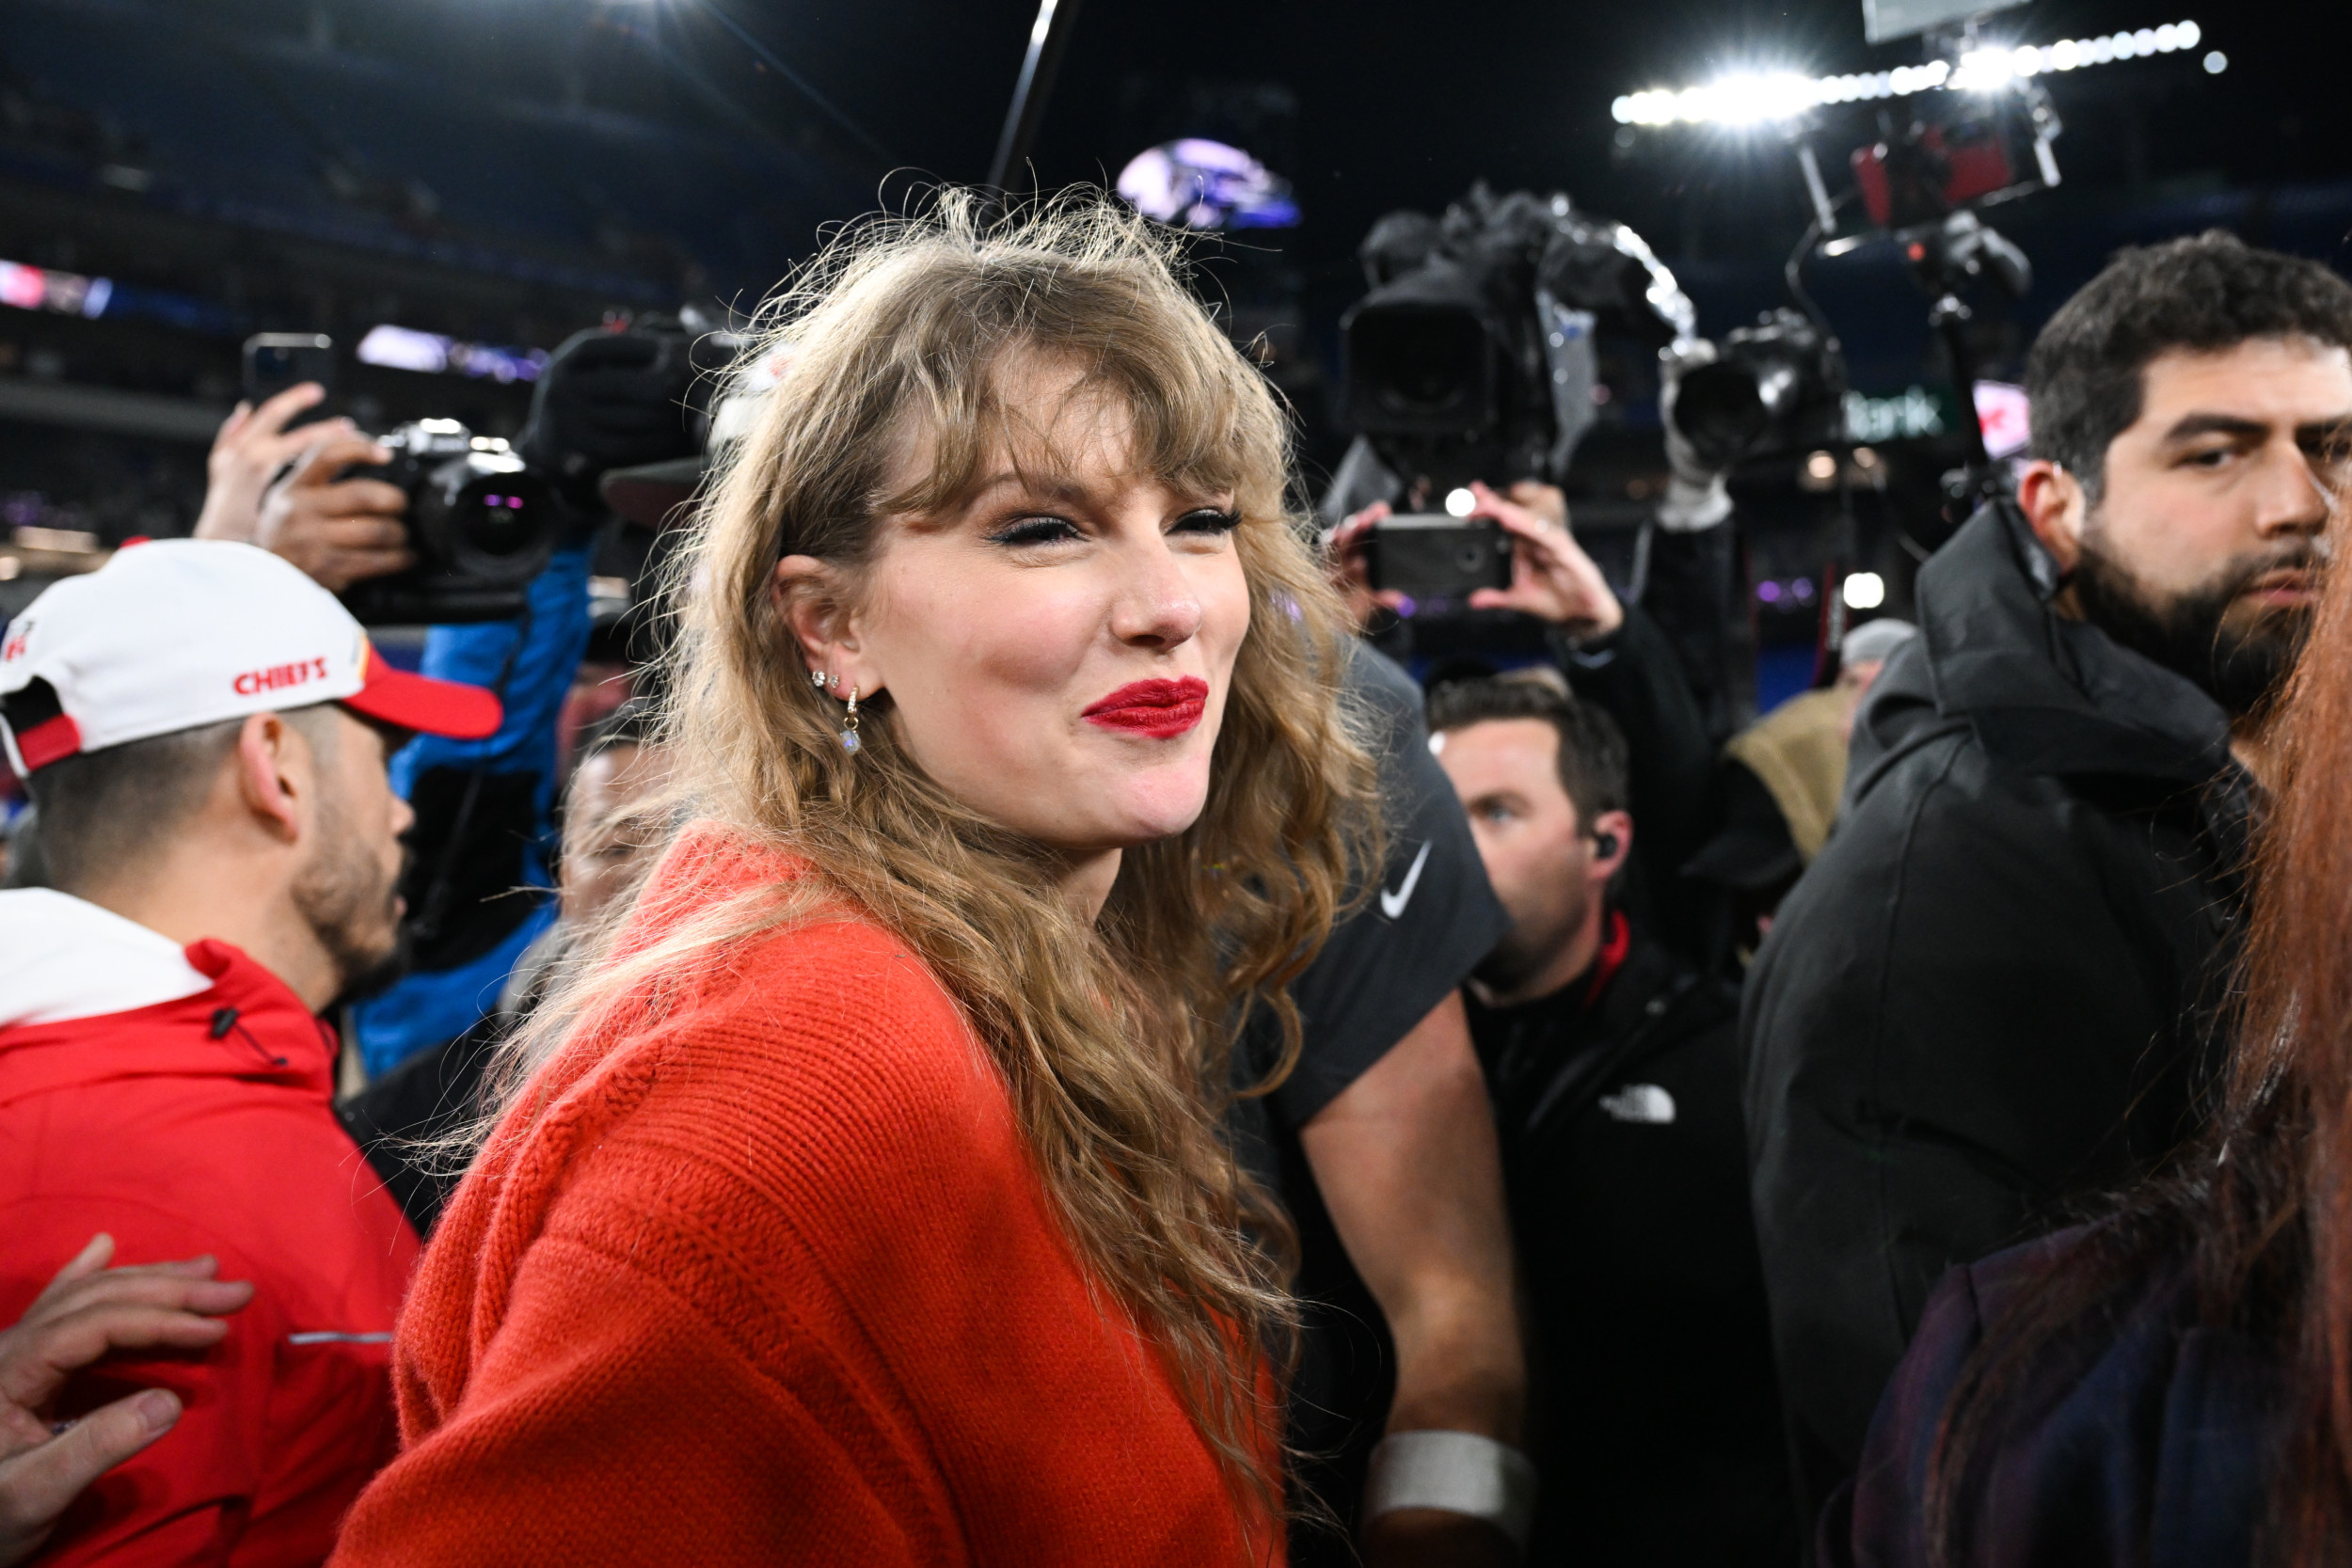 Taylor Swift's Message During Game Sparks Debate